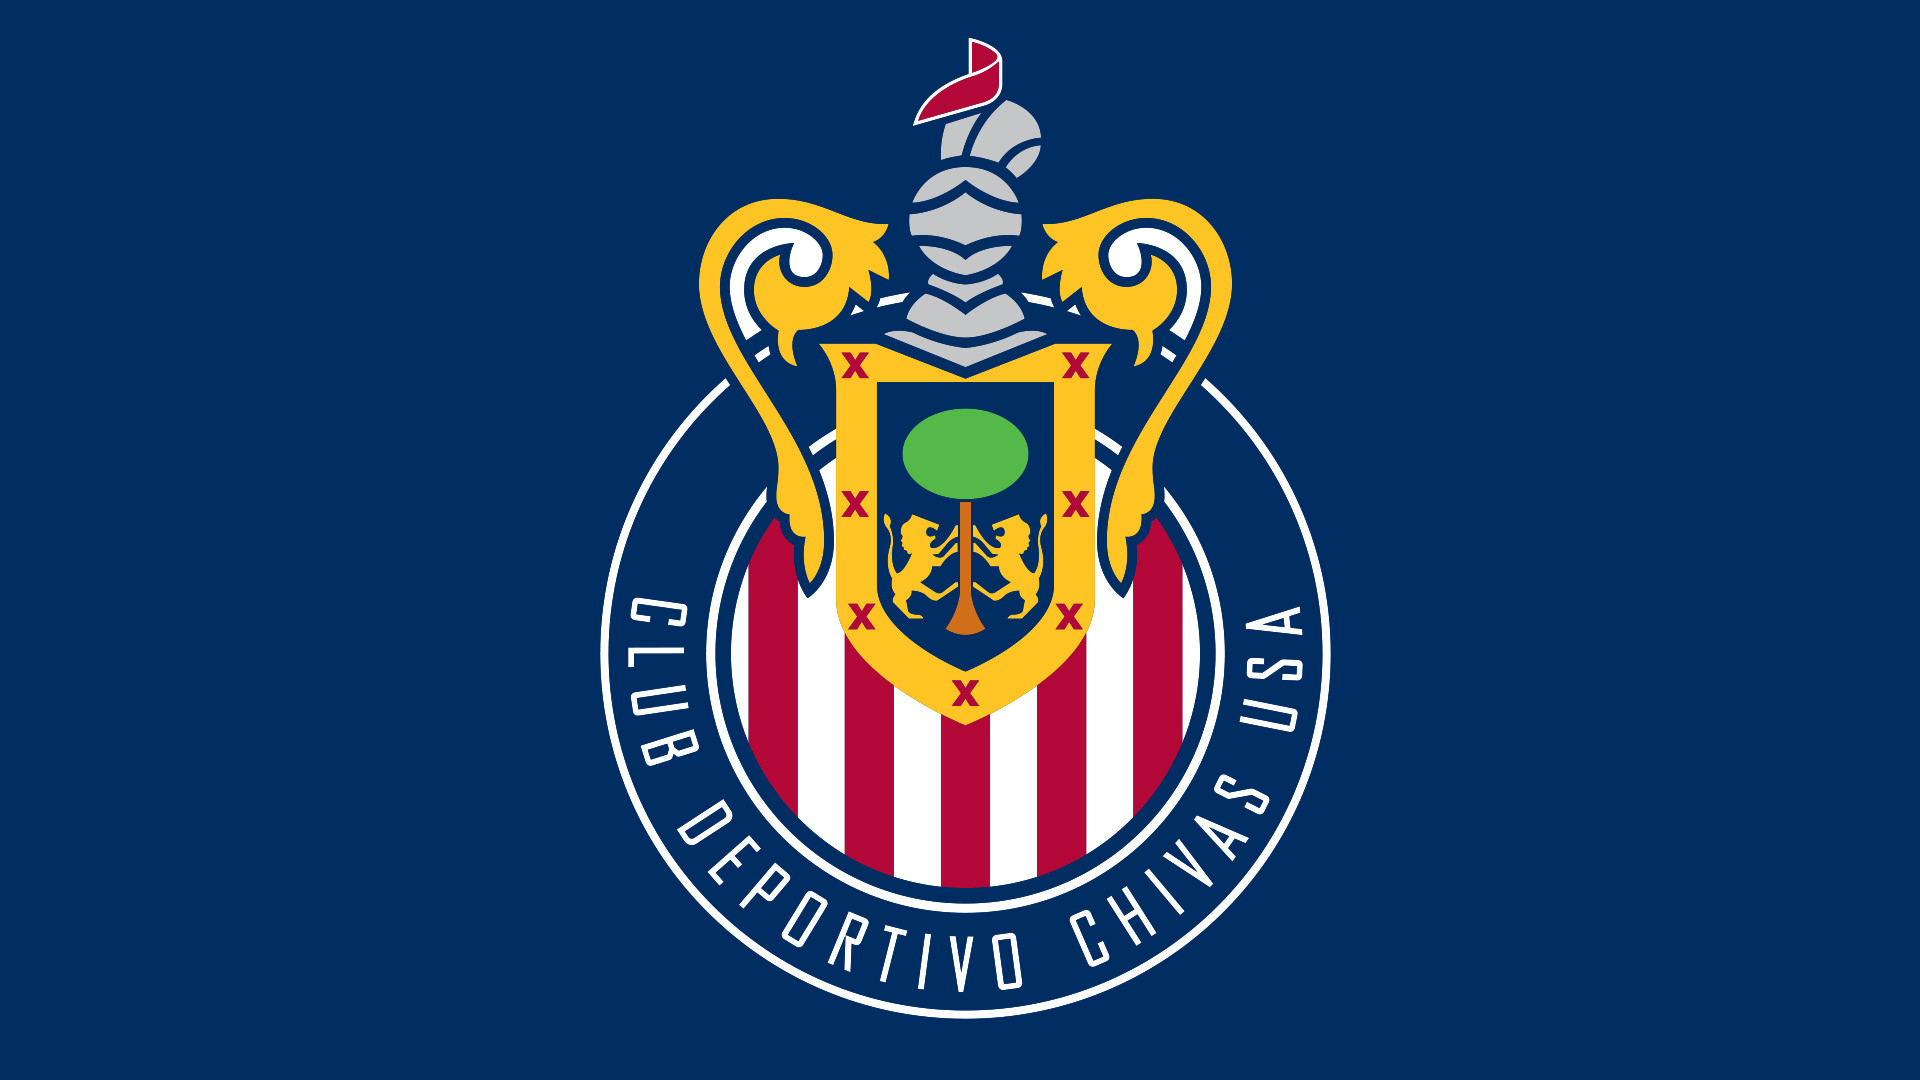 1920x1080 The Chivas logo is basically a thick blue ring with red and white stripes  inside. Over it, there's a shield shape with a knight's helmet.